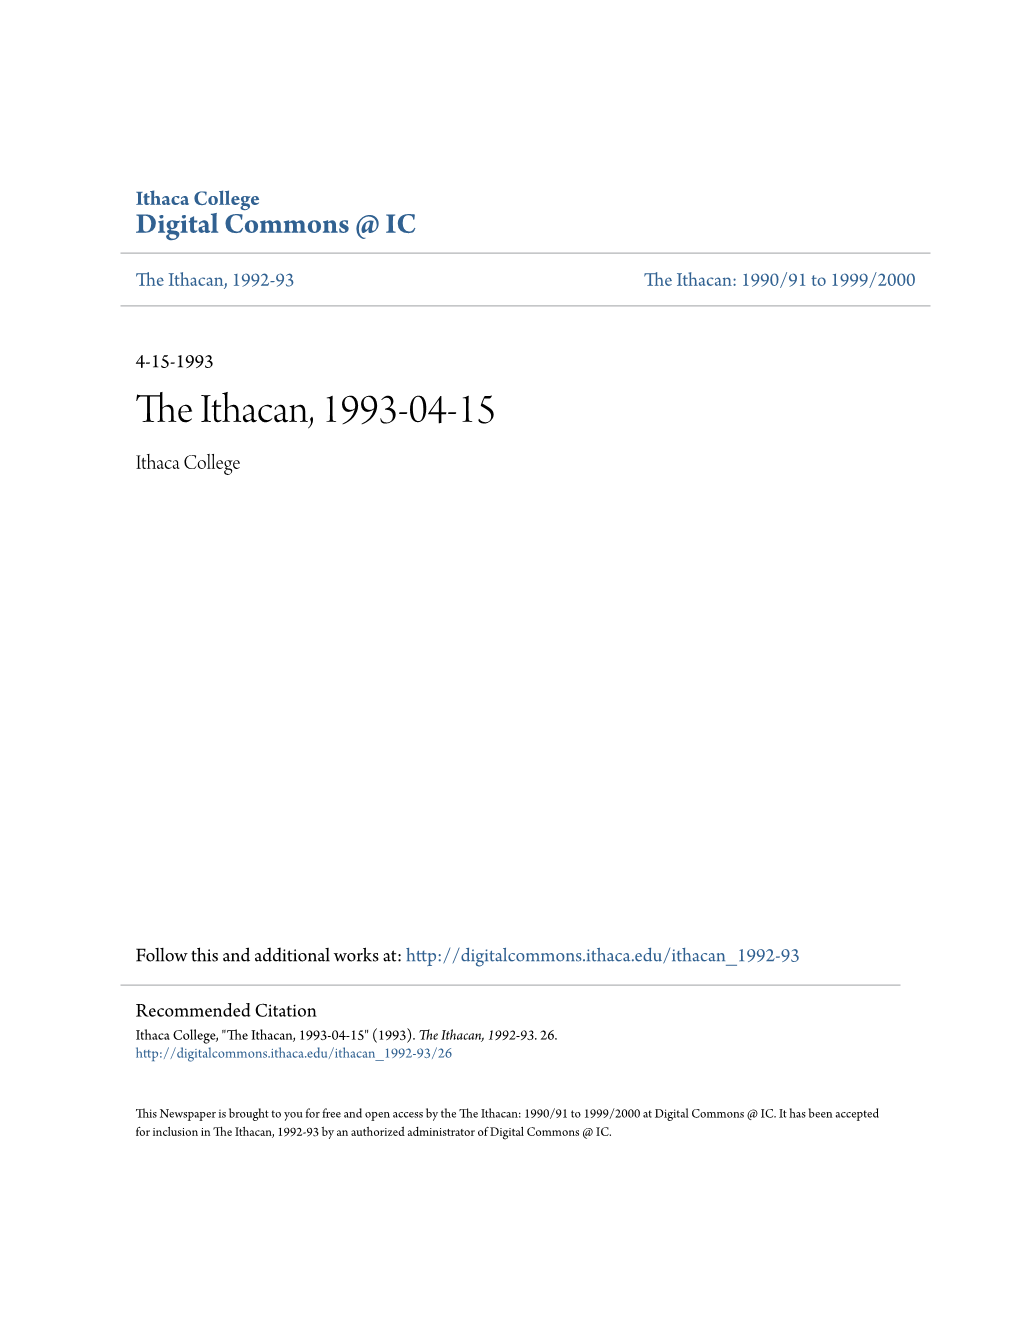 The Ithacan, 1993-04-15